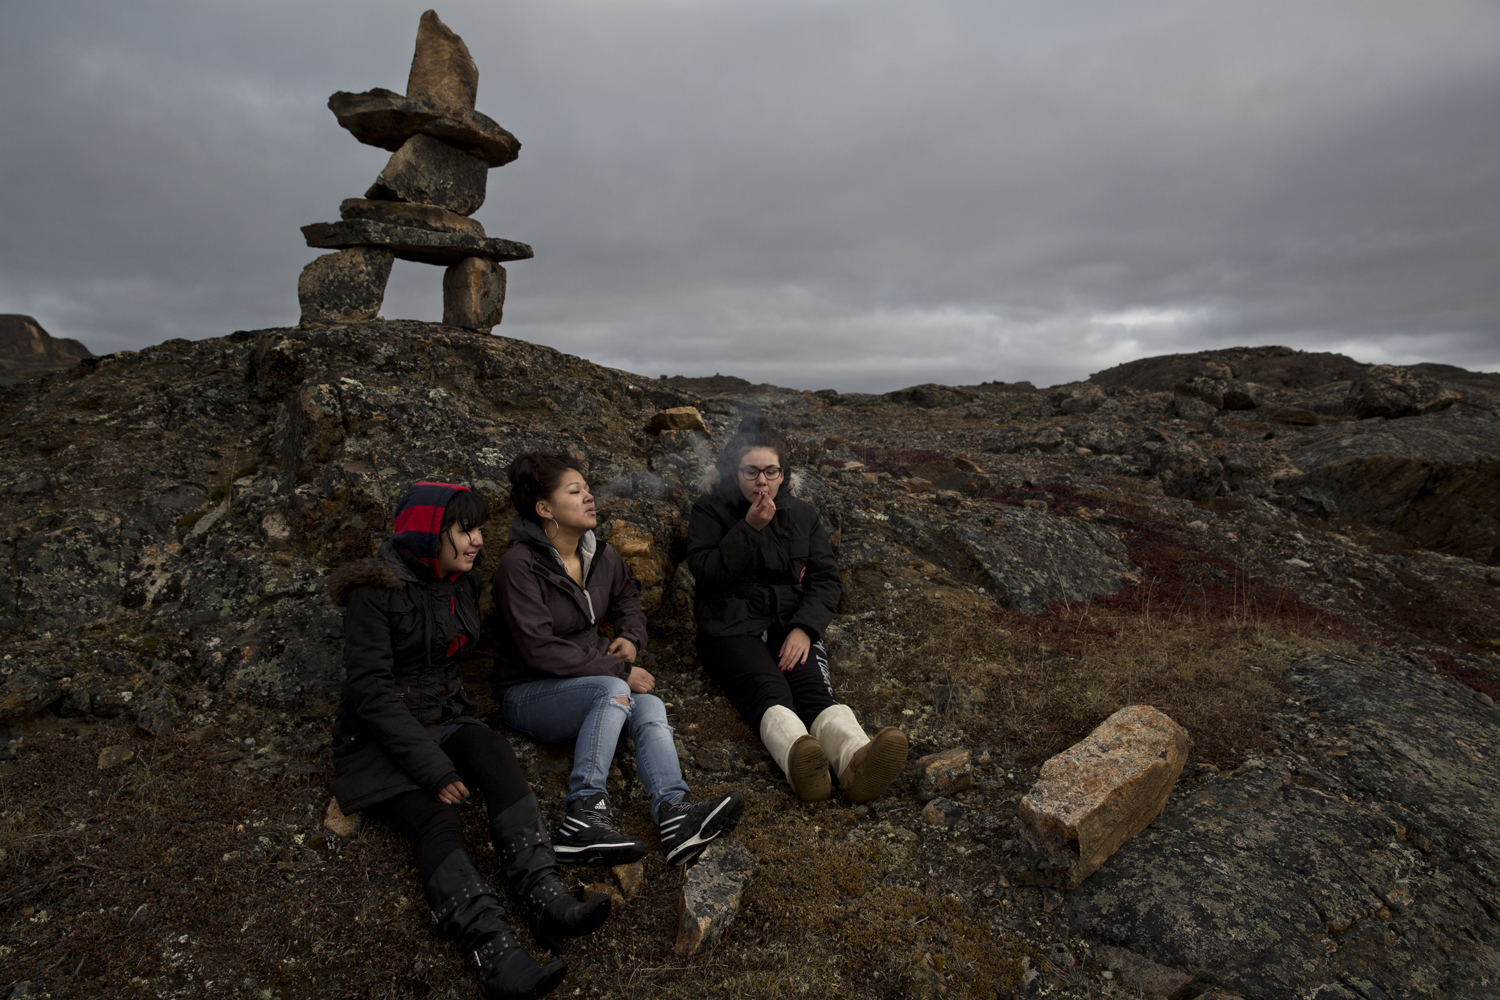 Iqaluit, Canada, Oct. 5, 2013. Kelly Amaujaq Fraser (left) smokes with her friends Vernuh Kanatsiak (middle) and Beth Idlout-Kheraj (right) under an inuksuk stone landmark. The inuksuk is traditionally used by the Inuit as a marker for navigation and is often thought of as a symbol of Inuit culture in Canada.